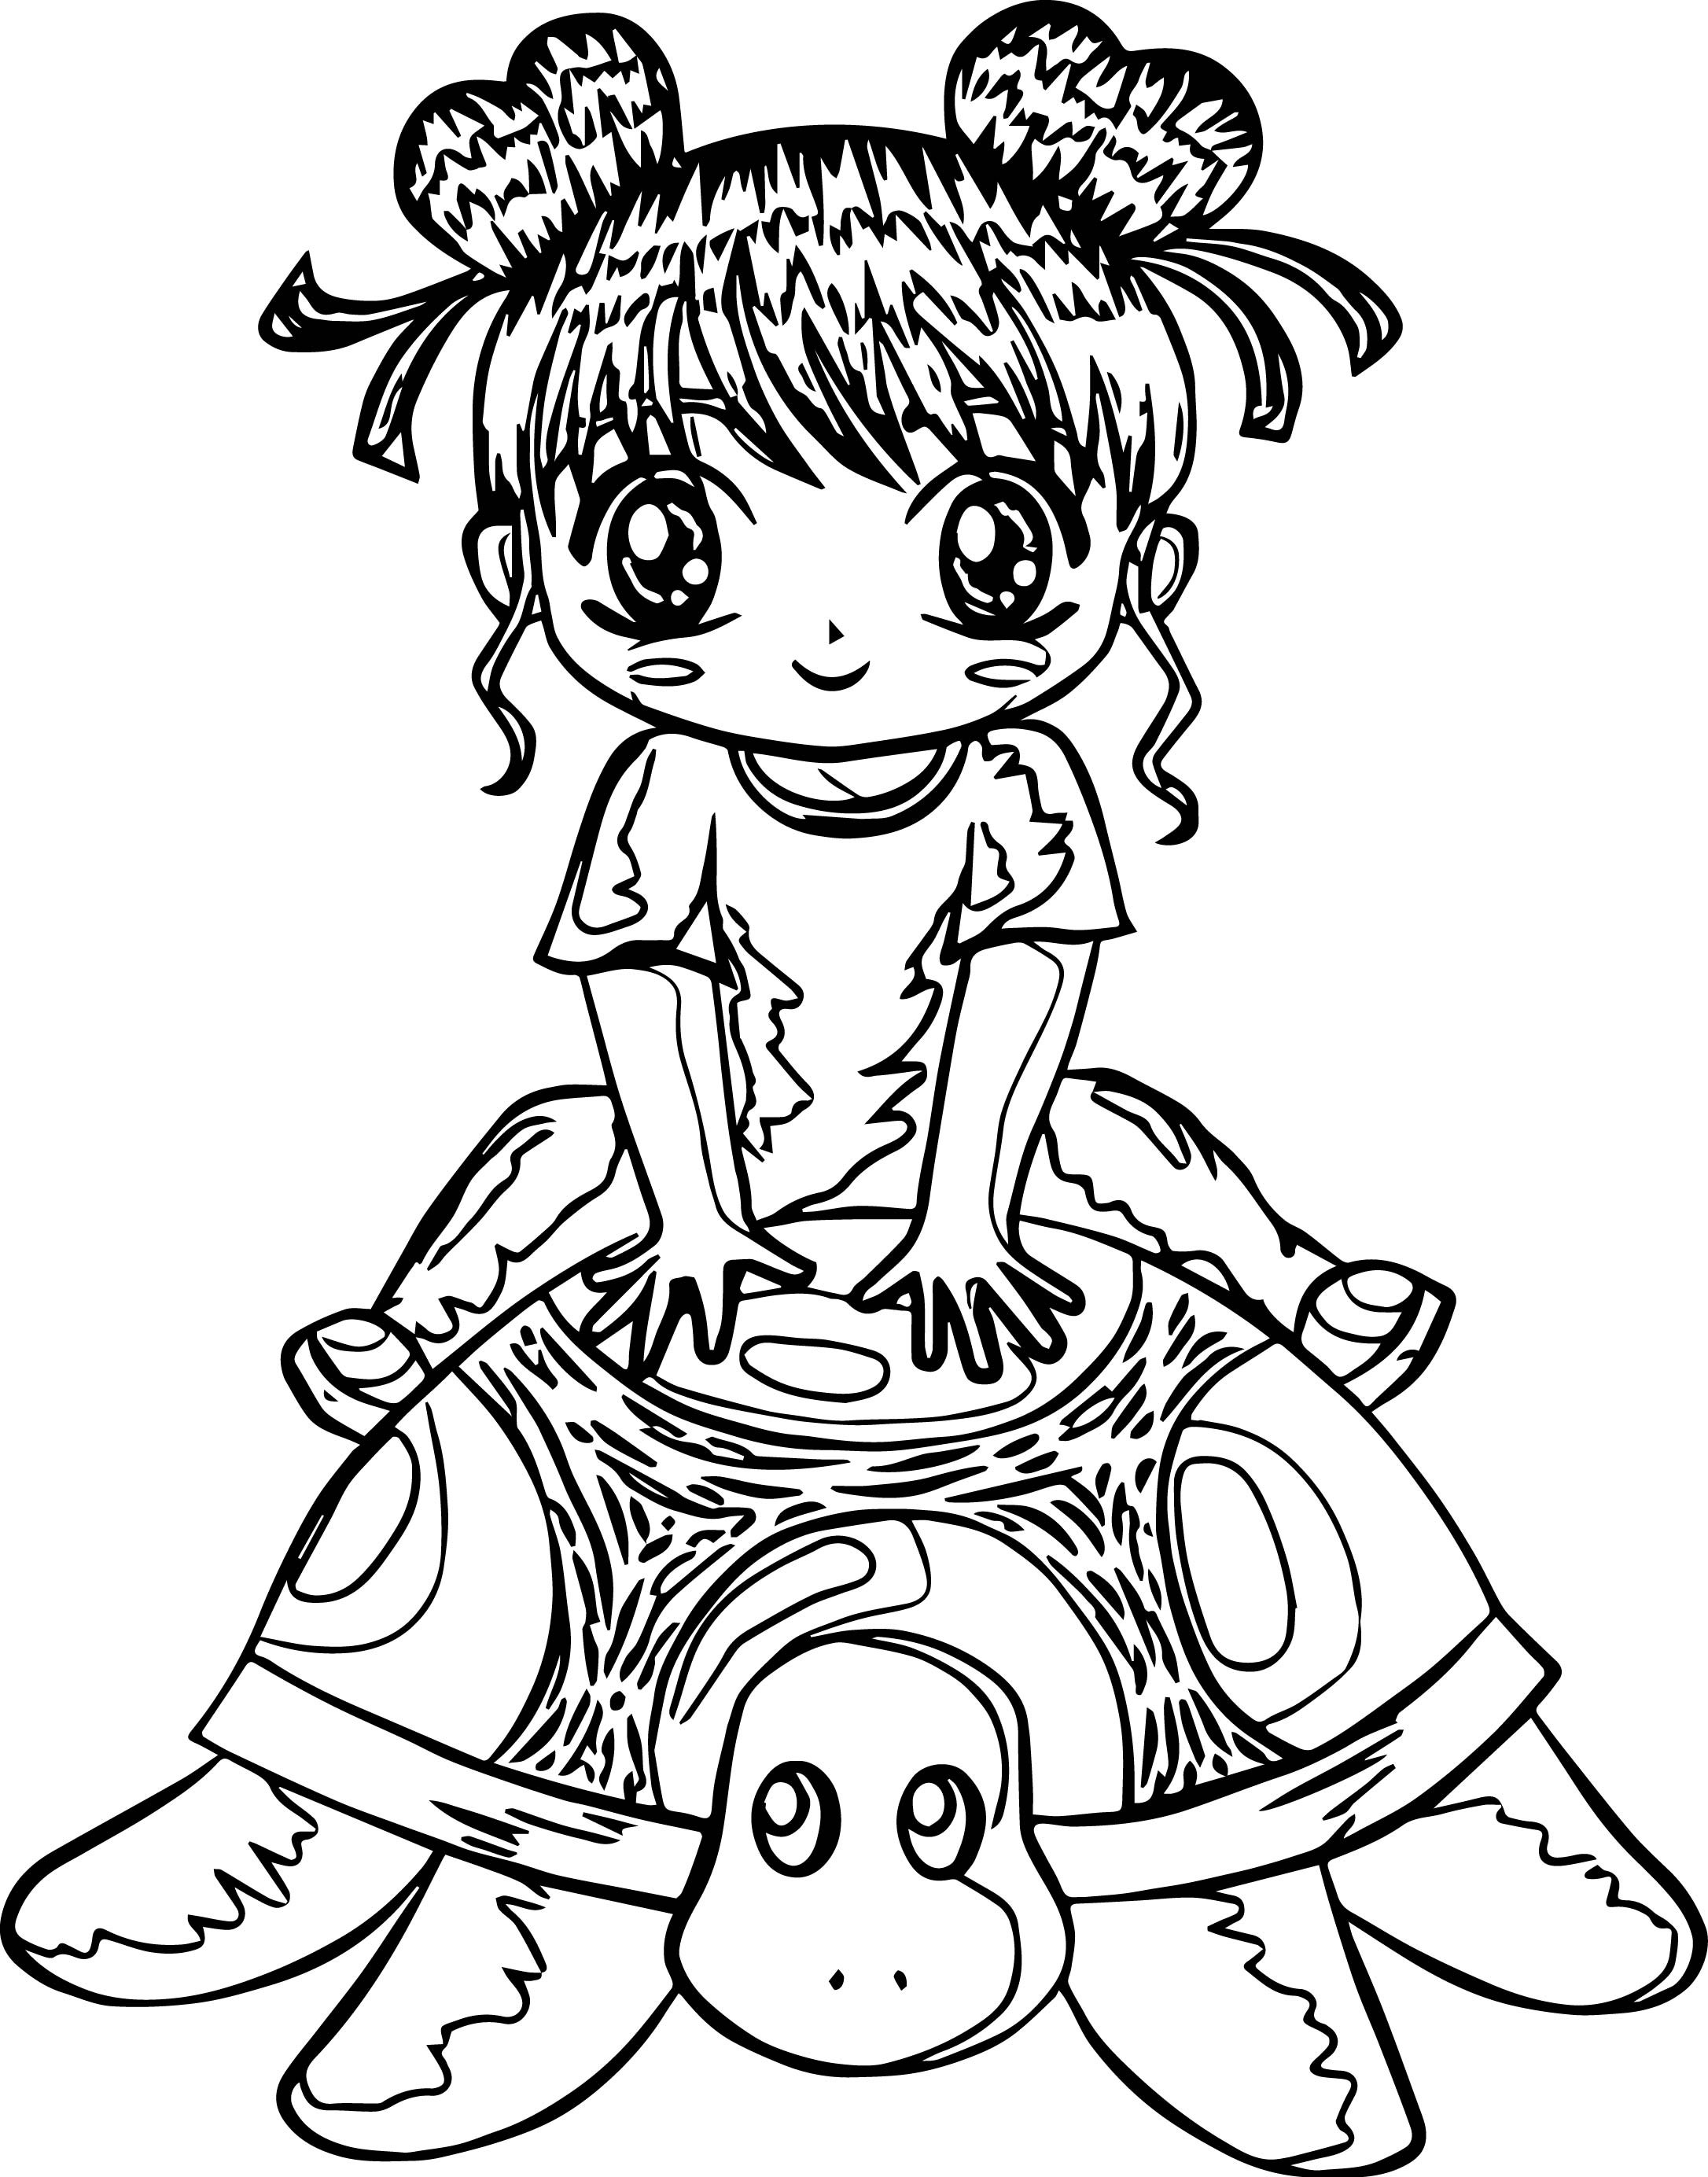 Girl Turtle Coloring Pages
 Manga Girl Japan Tortoise Turtle Coloring Page